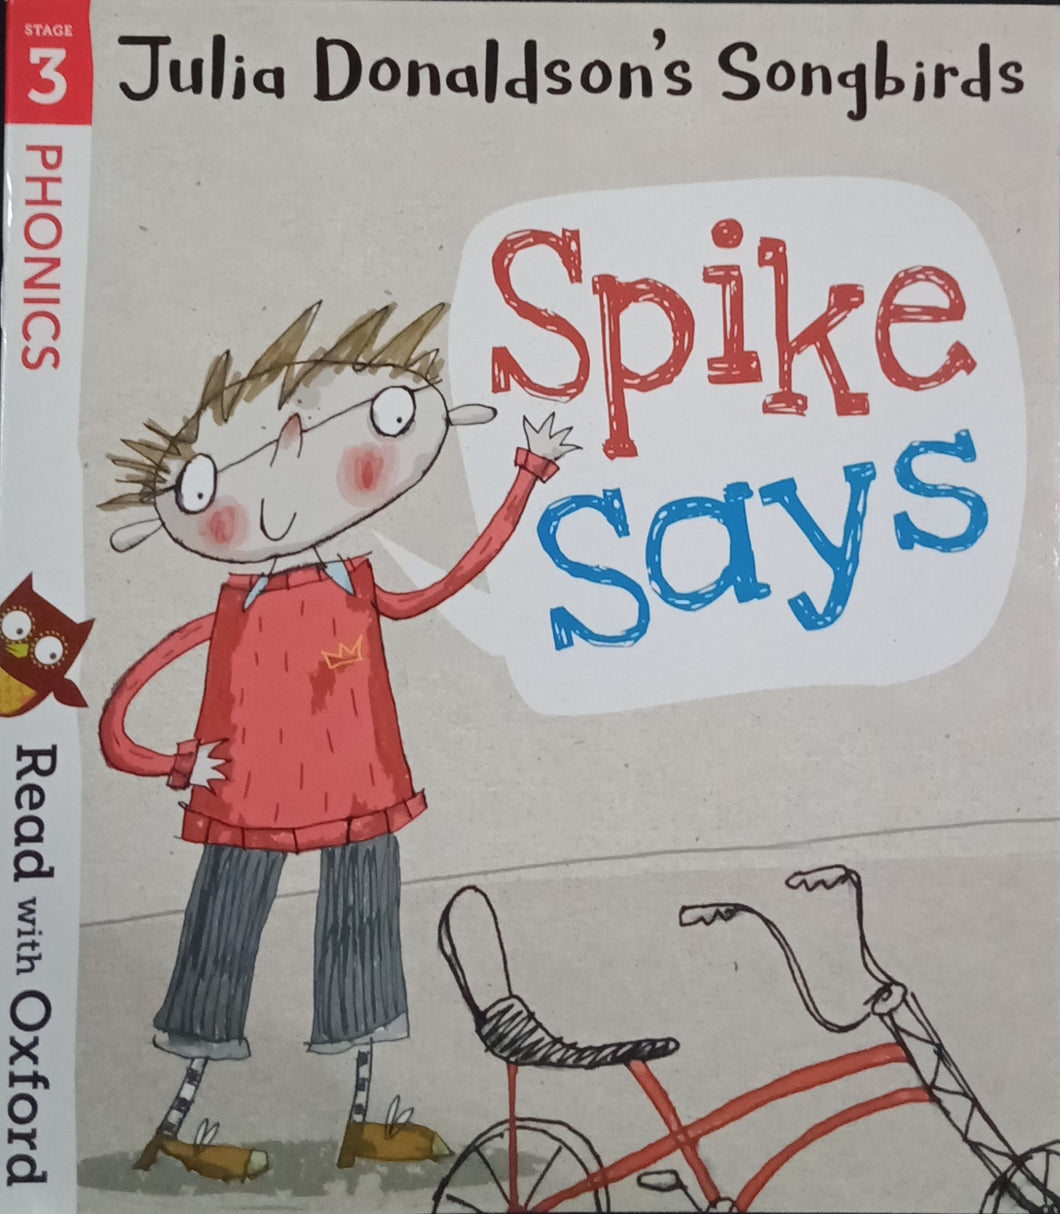 Spike Says by Julia Donaldson's Songbirds